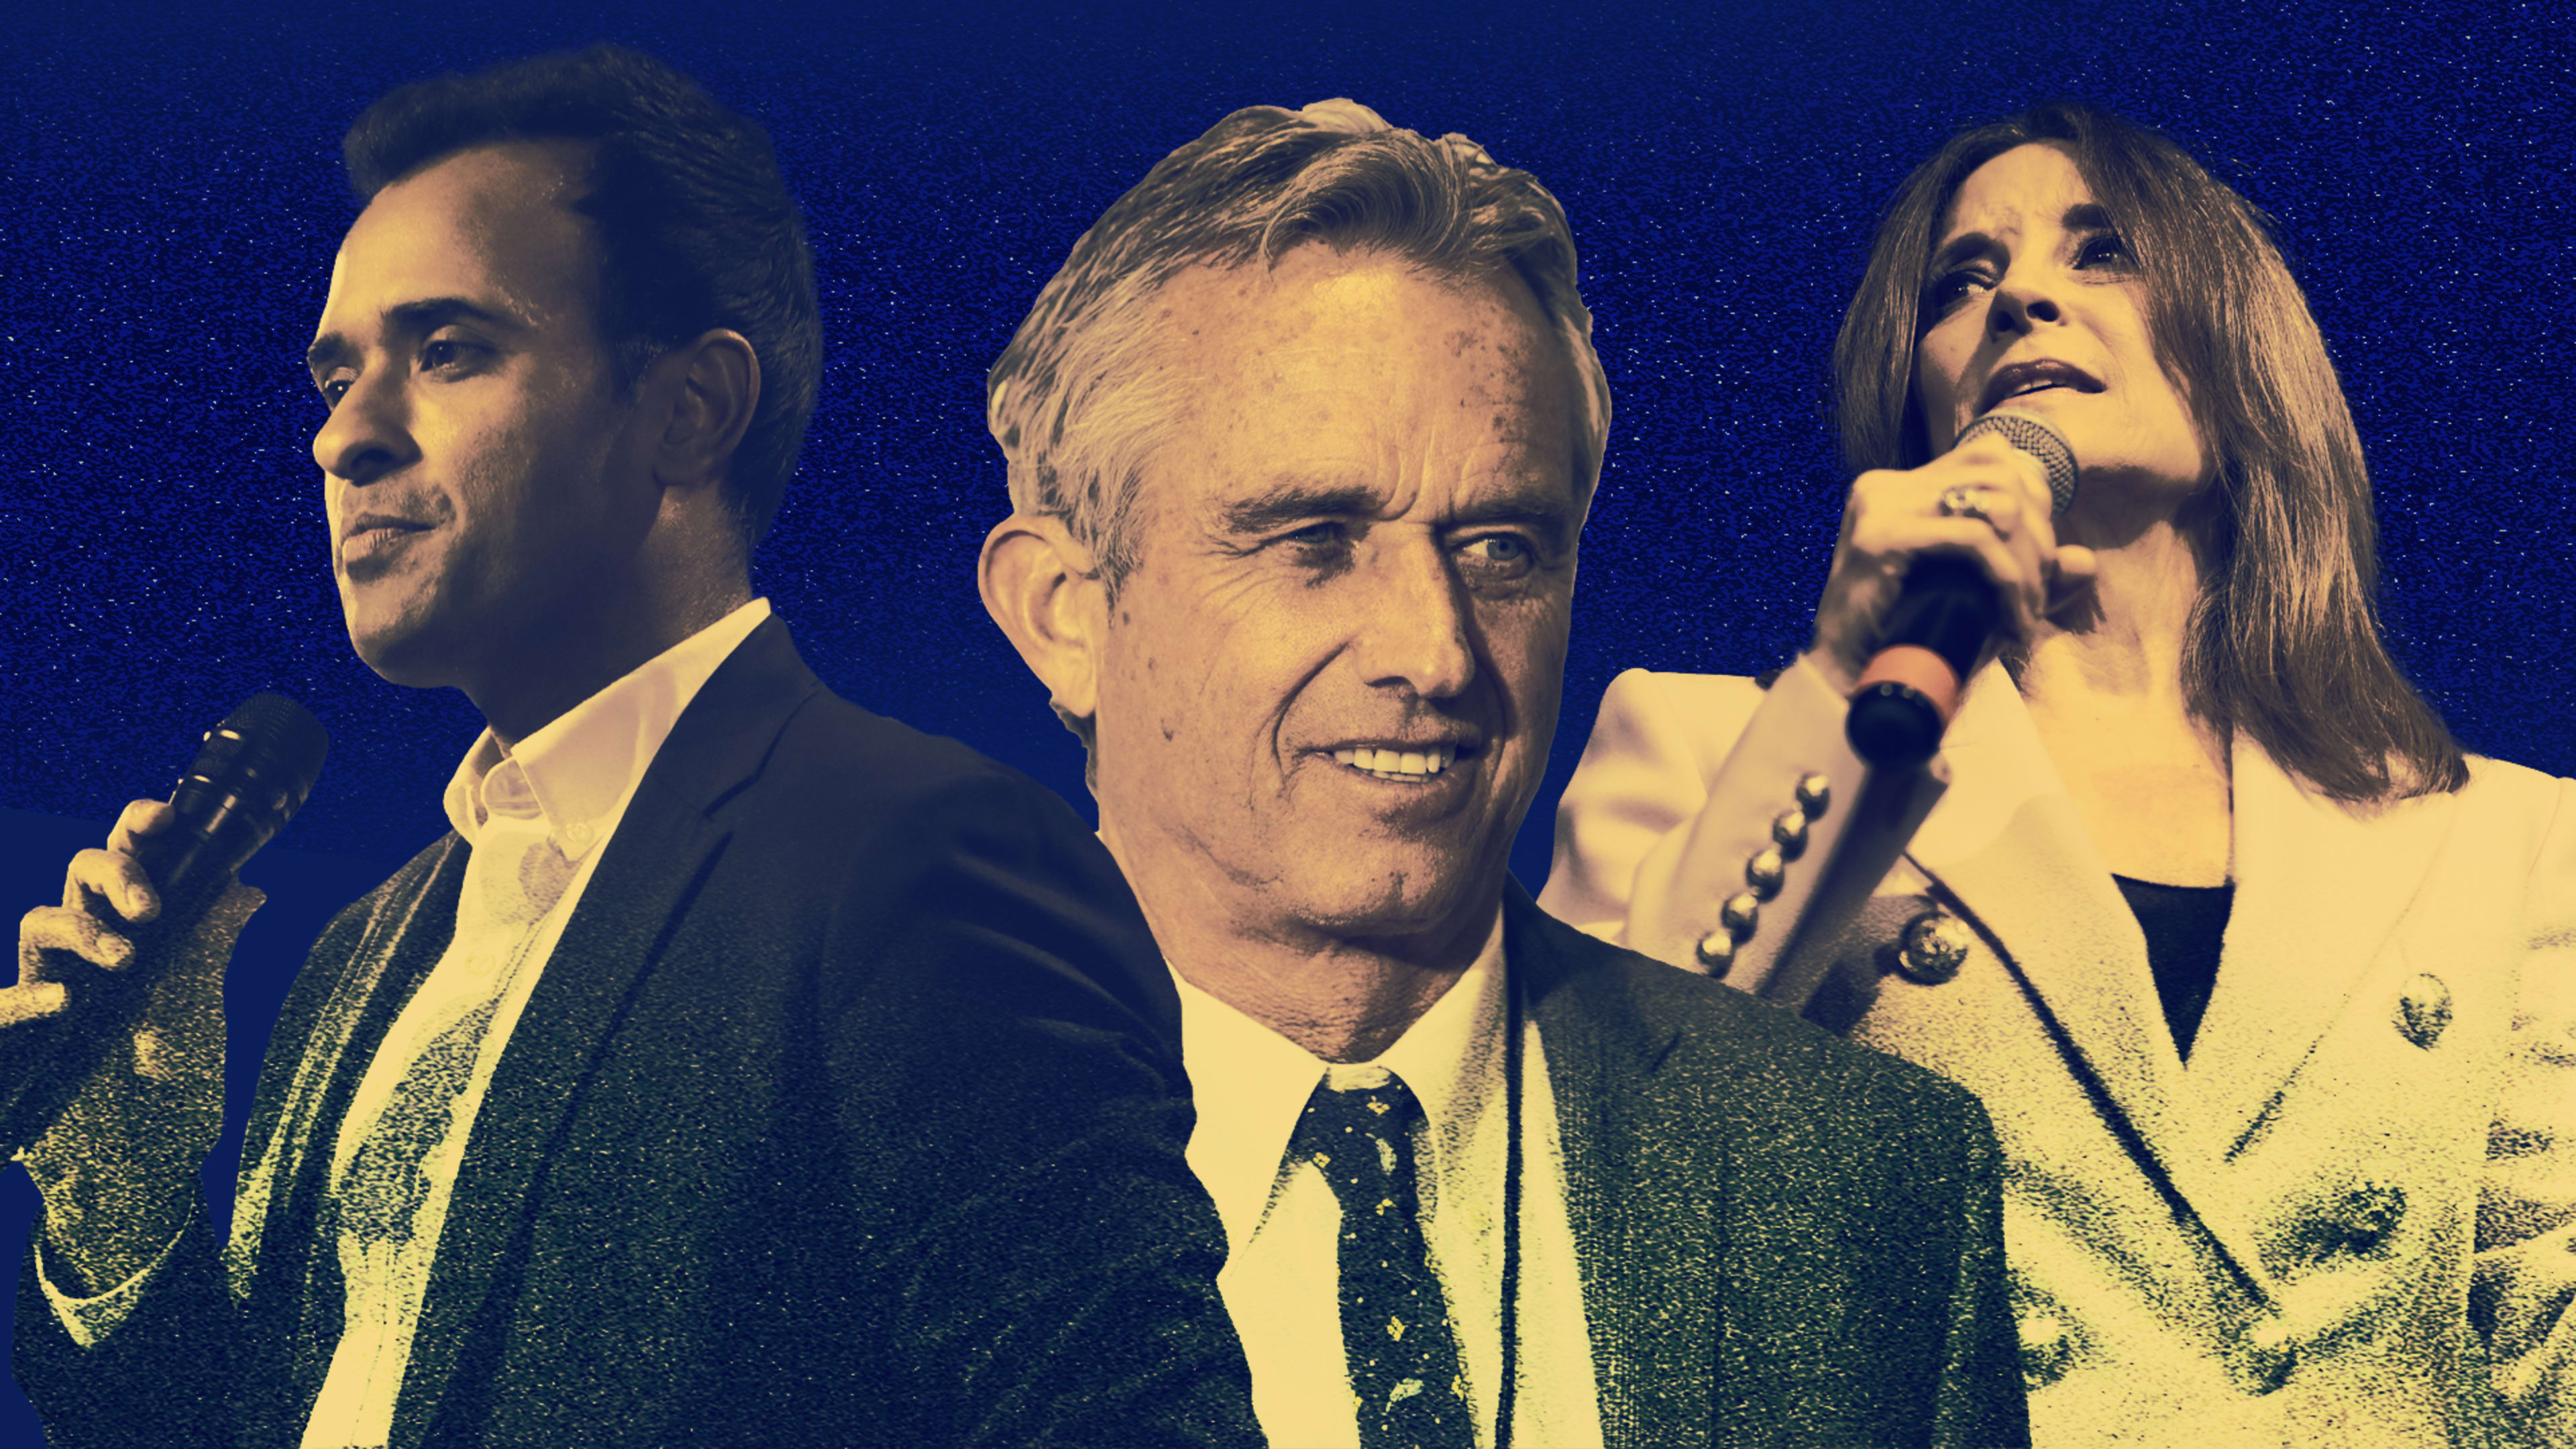 I binge-listened to outsider presidential candidates on podcasts, and what I learned was terrifying